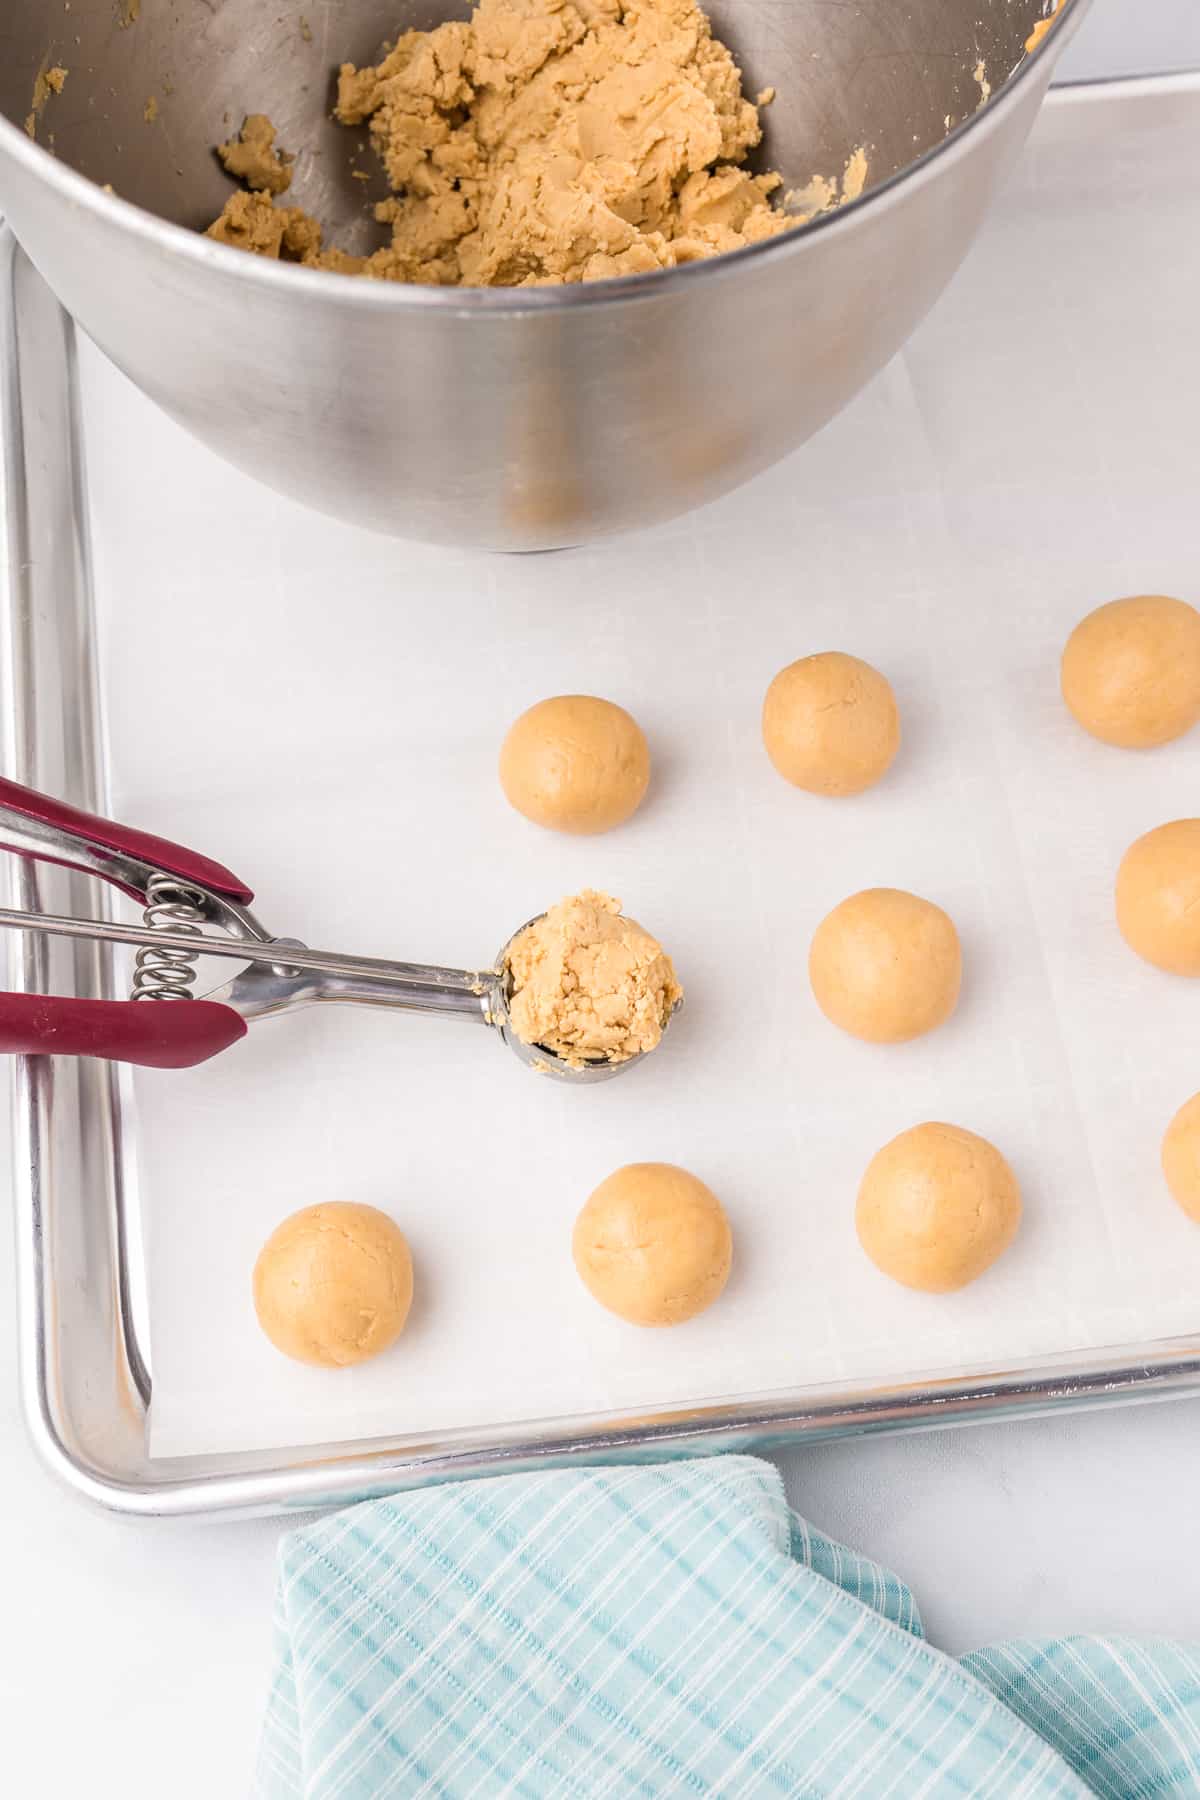 Rolled peanut butter dough on a sheet pan next to a small cookie scoop full of dough with a mixing bowl full of dough nearby.